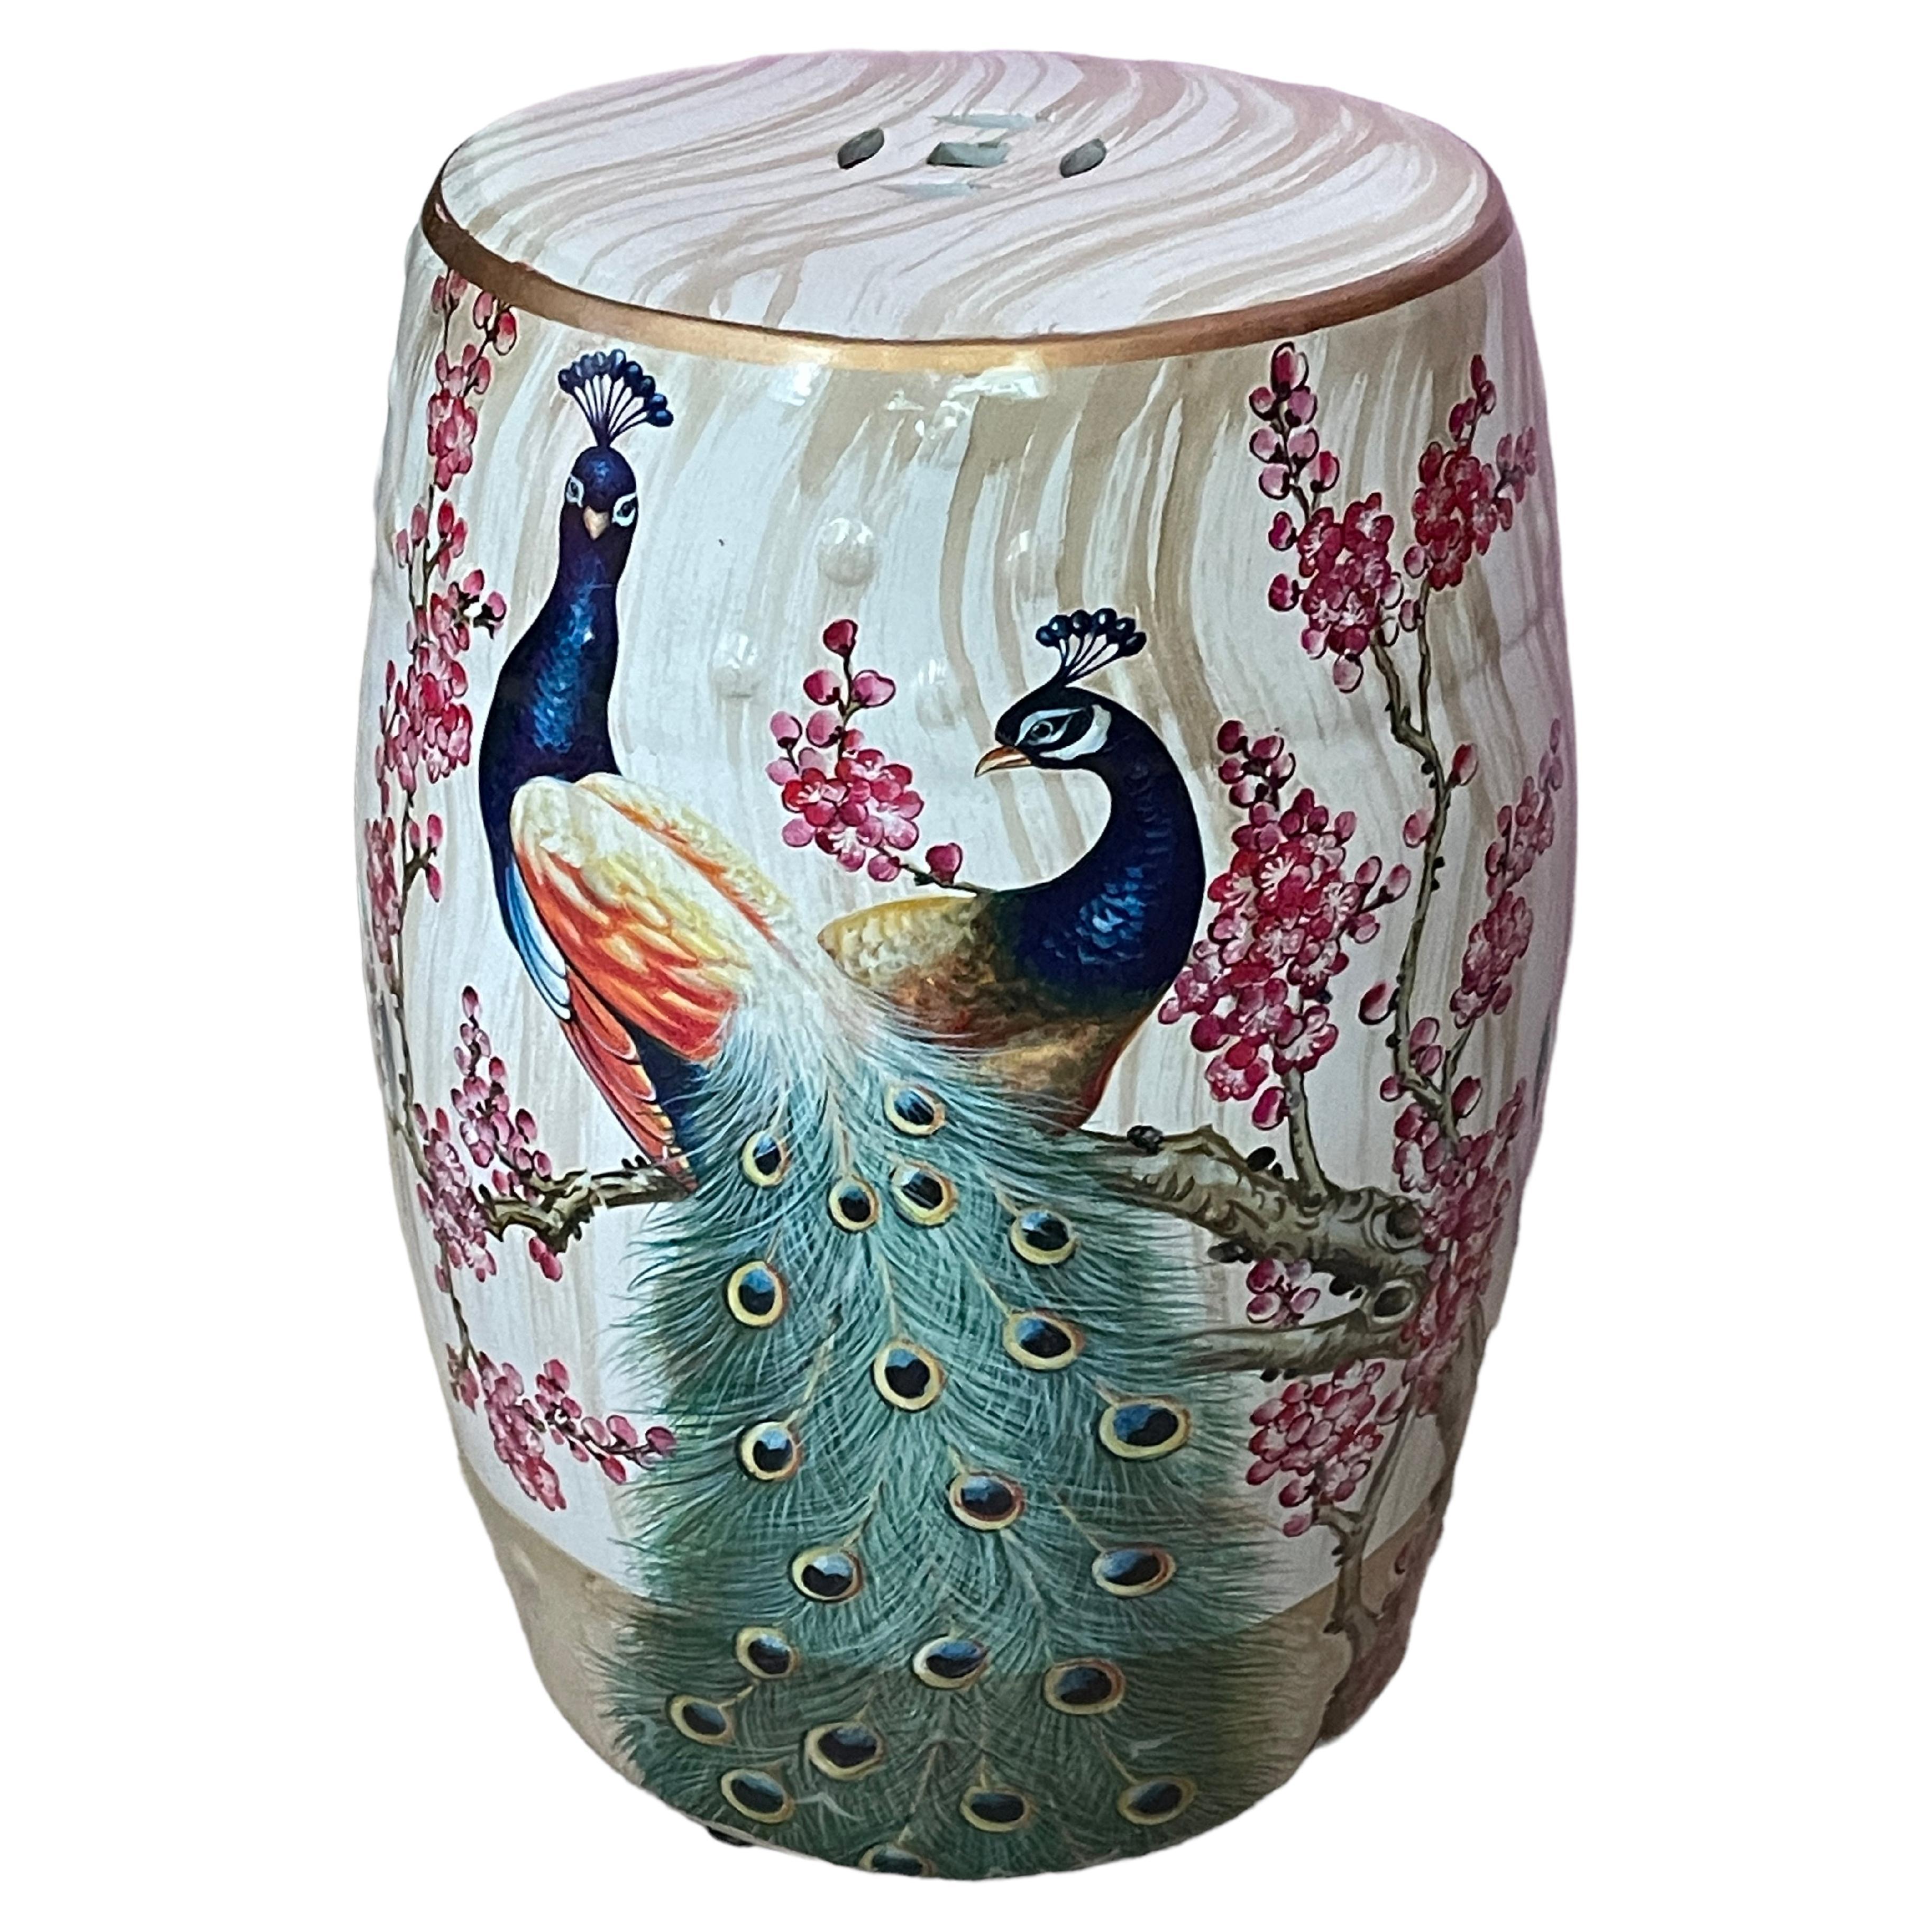 Mid-20th Century Chinese Export Hand-Painted Garden Stool Flower Pot Seat For Sale